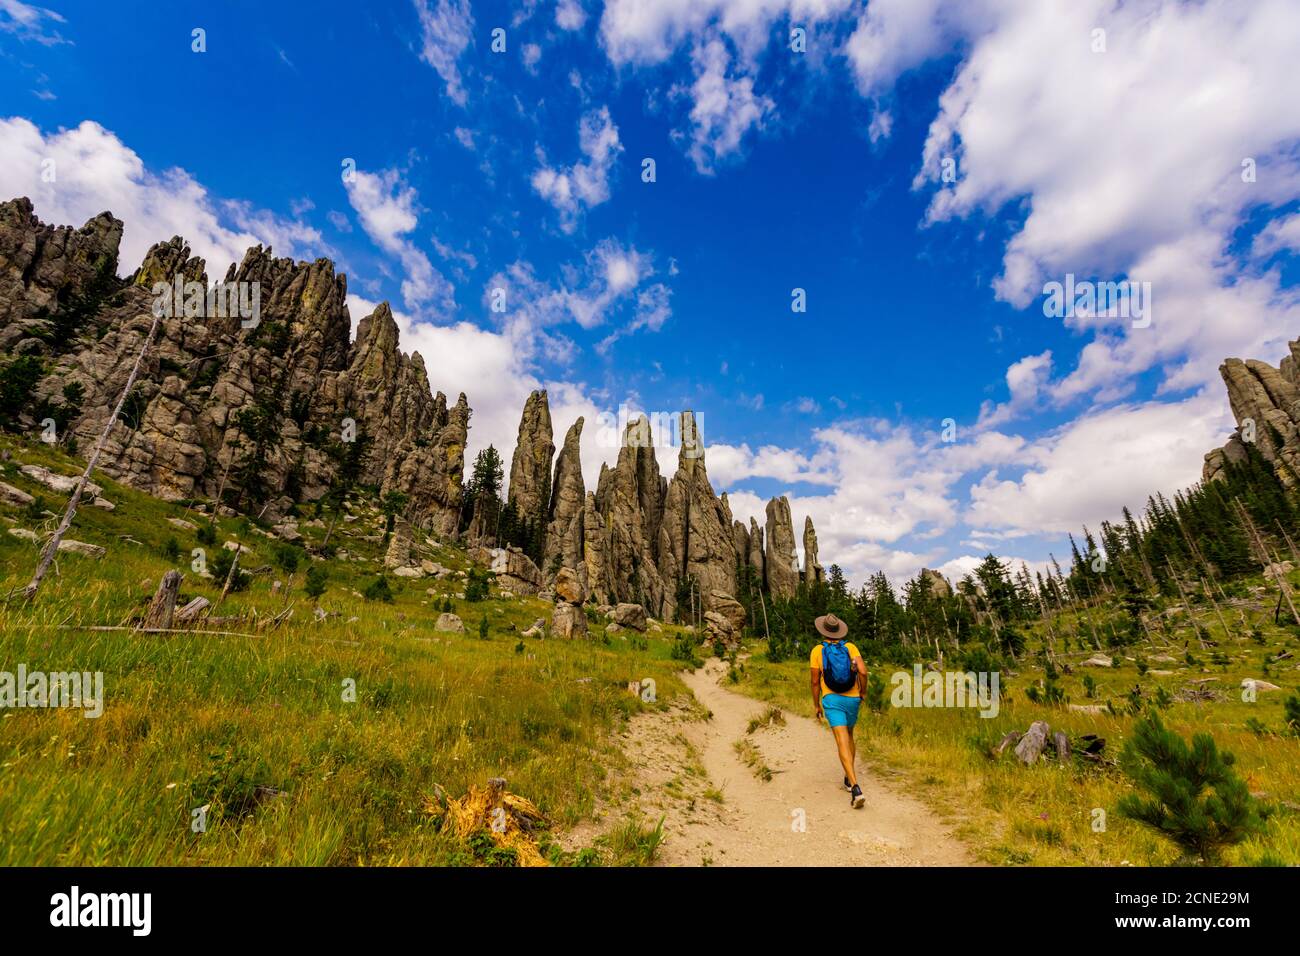 Man hiking the trails and enjoying the sights in the Black Hills of Keystone, South Dakota, United States of America Stock Photo